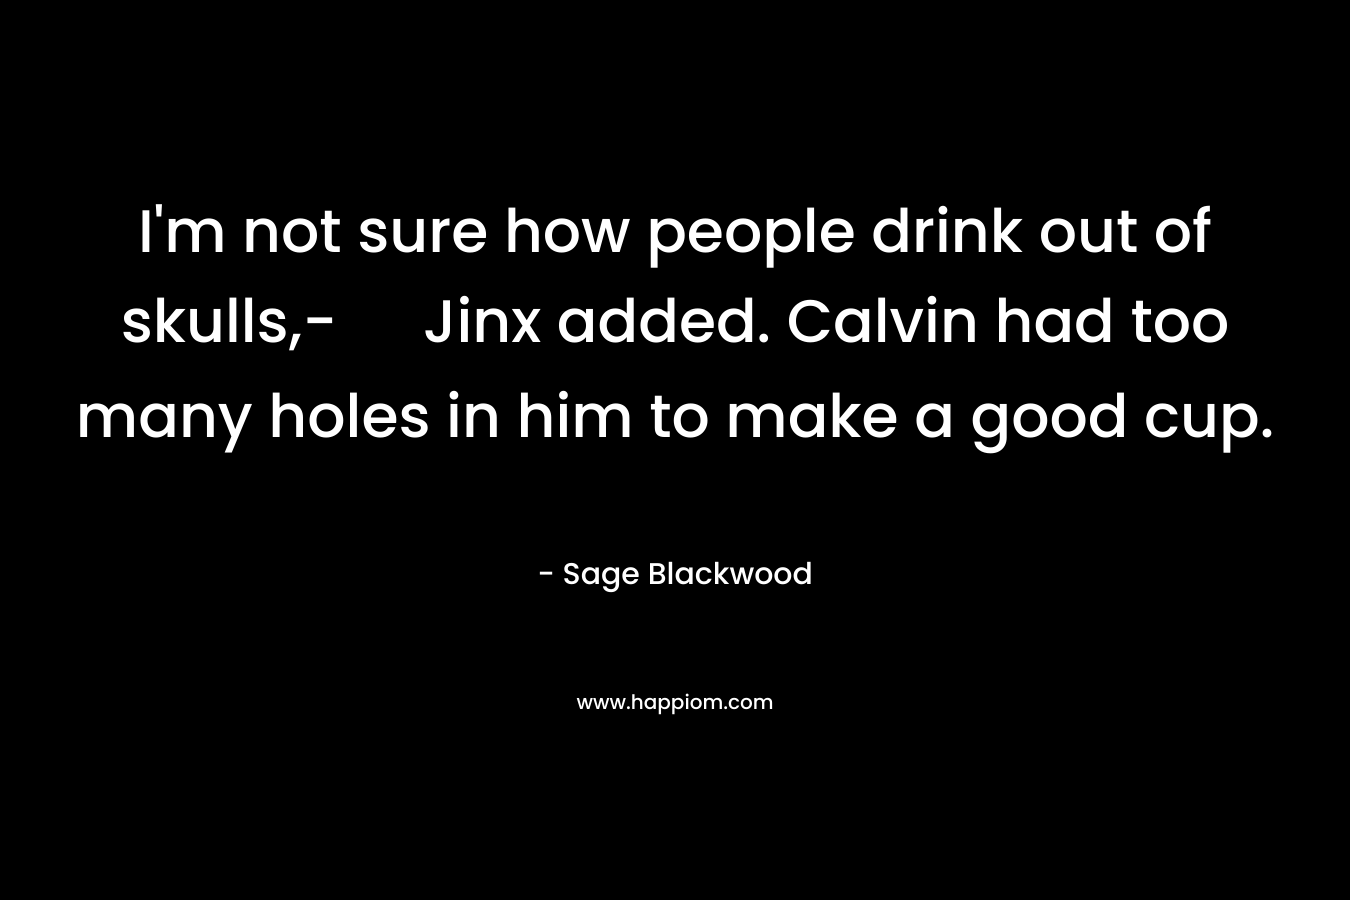 I’m not sure how people drink out of skulls,- Jinx added. Calvin had too many holes in him to make a good cup. – Sage Blackwood